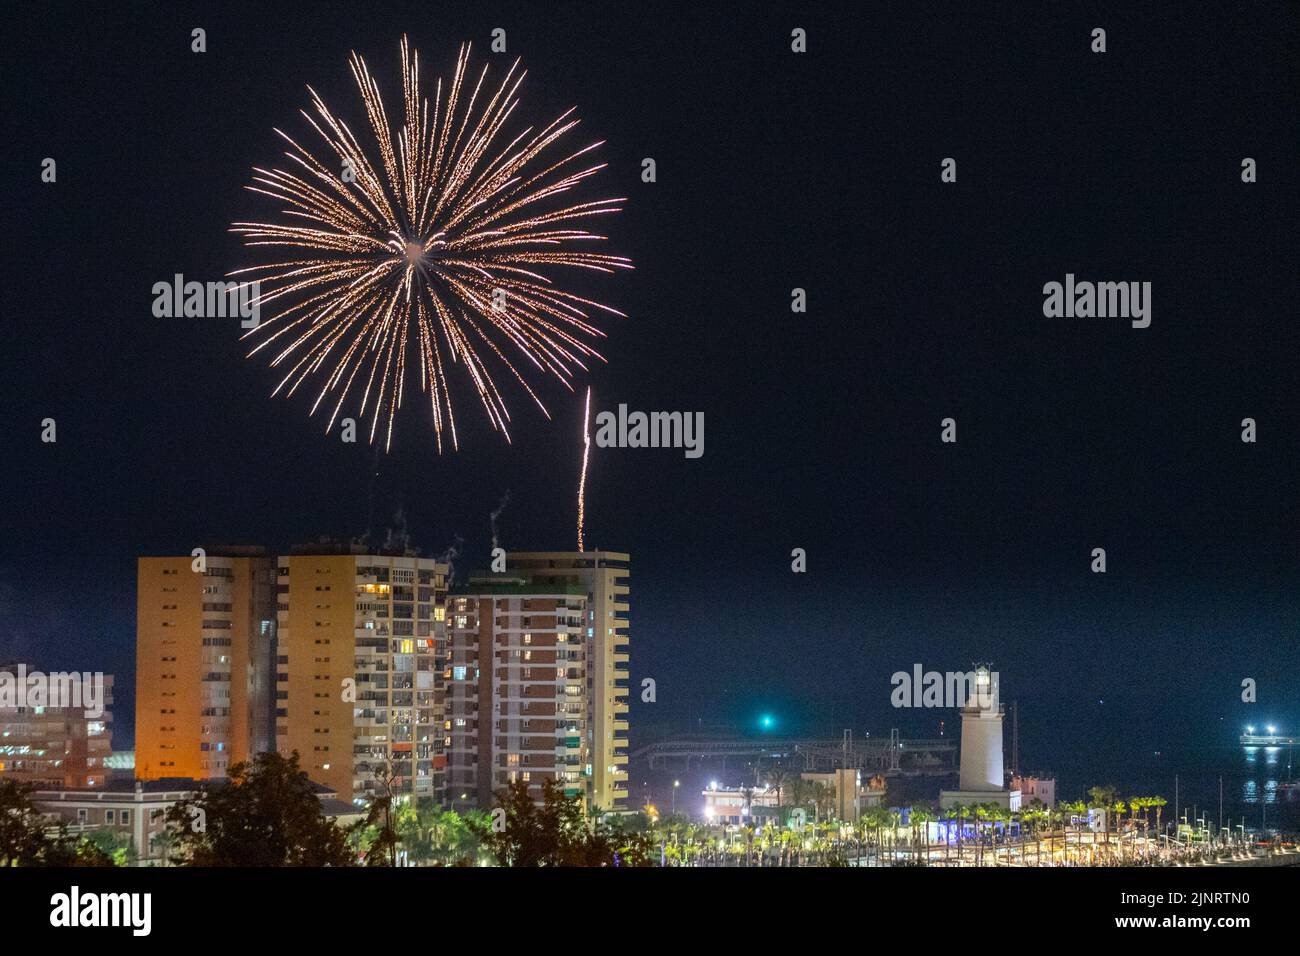 Panoramic view of fireworks at Malaga Cruise Port in Malaga due to the inauguration of Malaga's Fair 2022 The Fair is being held for the first time since 2019. The 2020 and 2021 editions were suspended due to Covid19 pandemic. Stock Photo